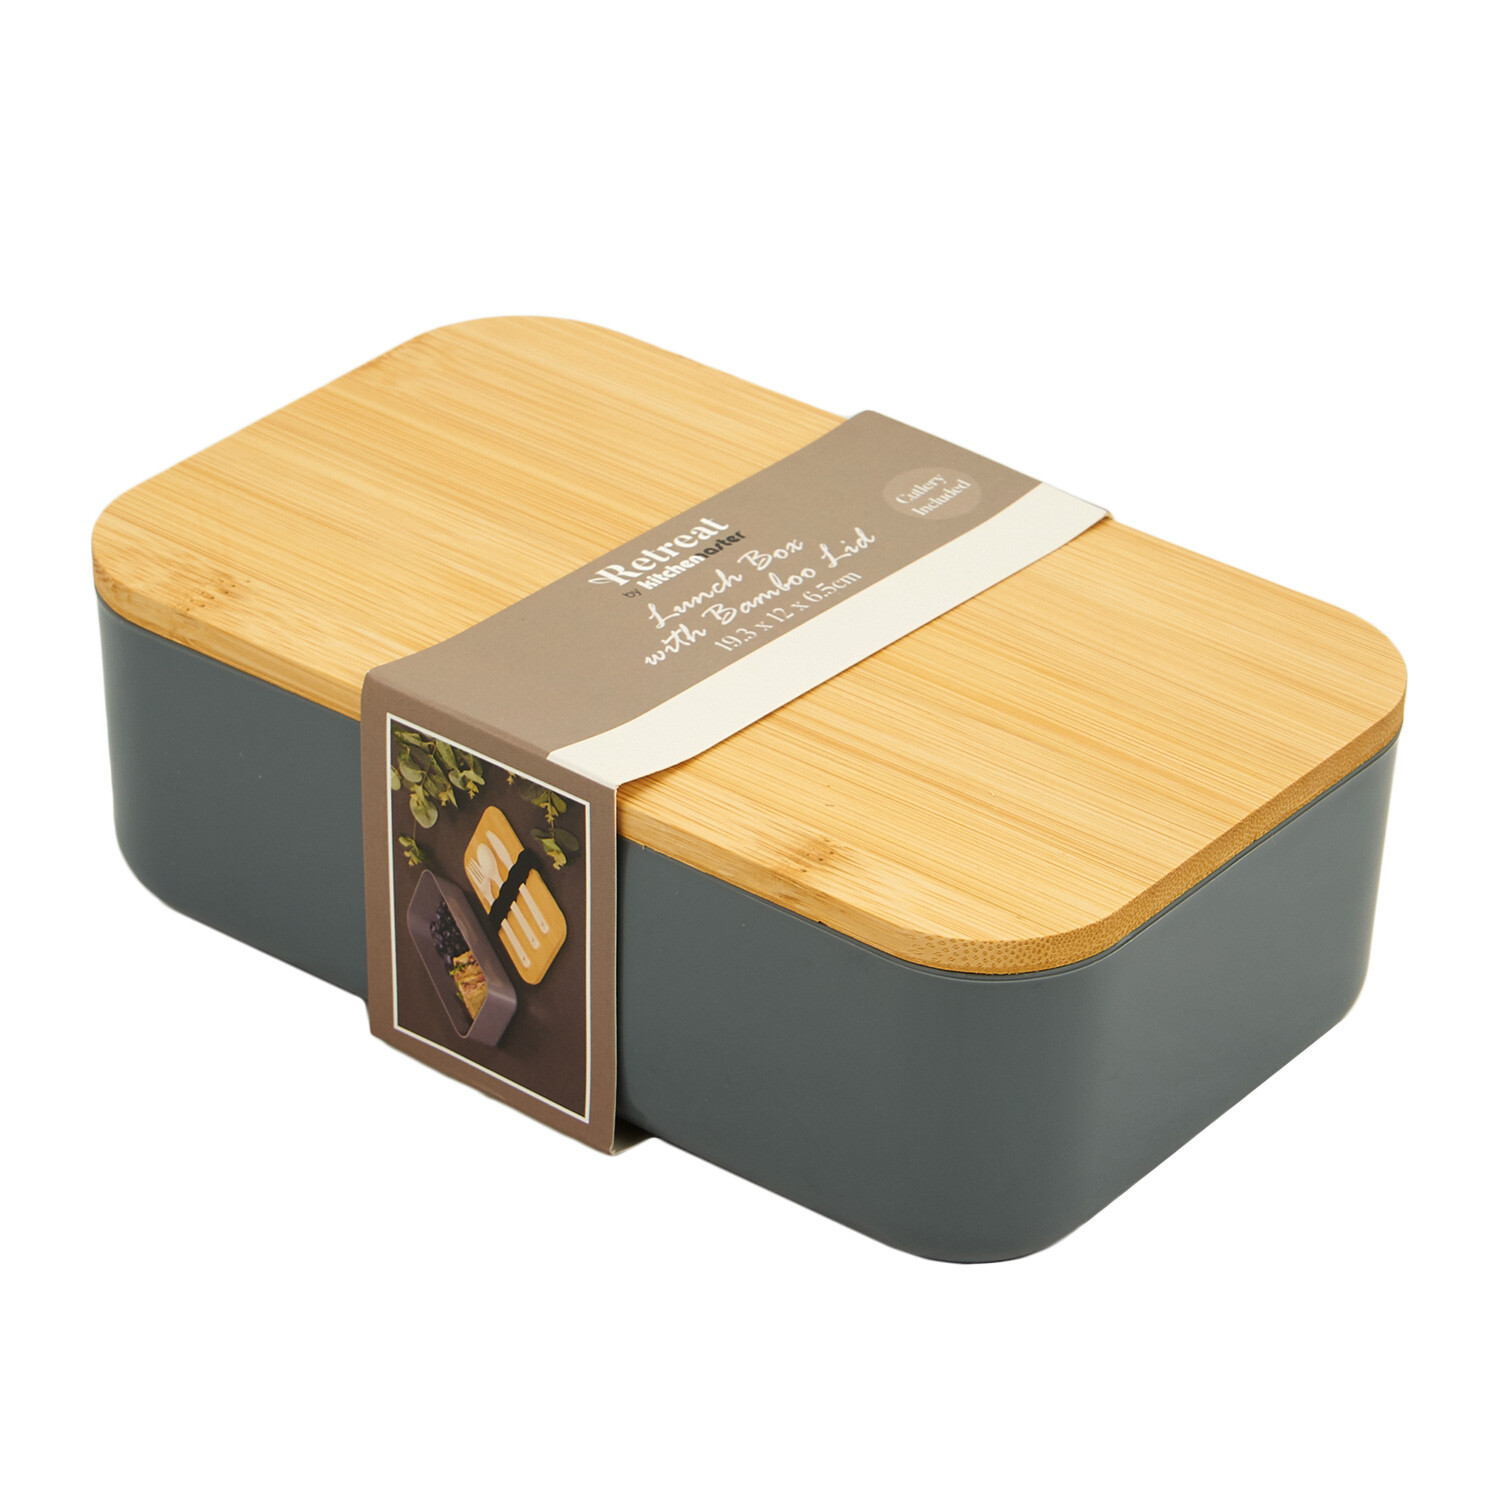 Lunch Box with Bamboo Lid and Cutlery - Grey Image 1